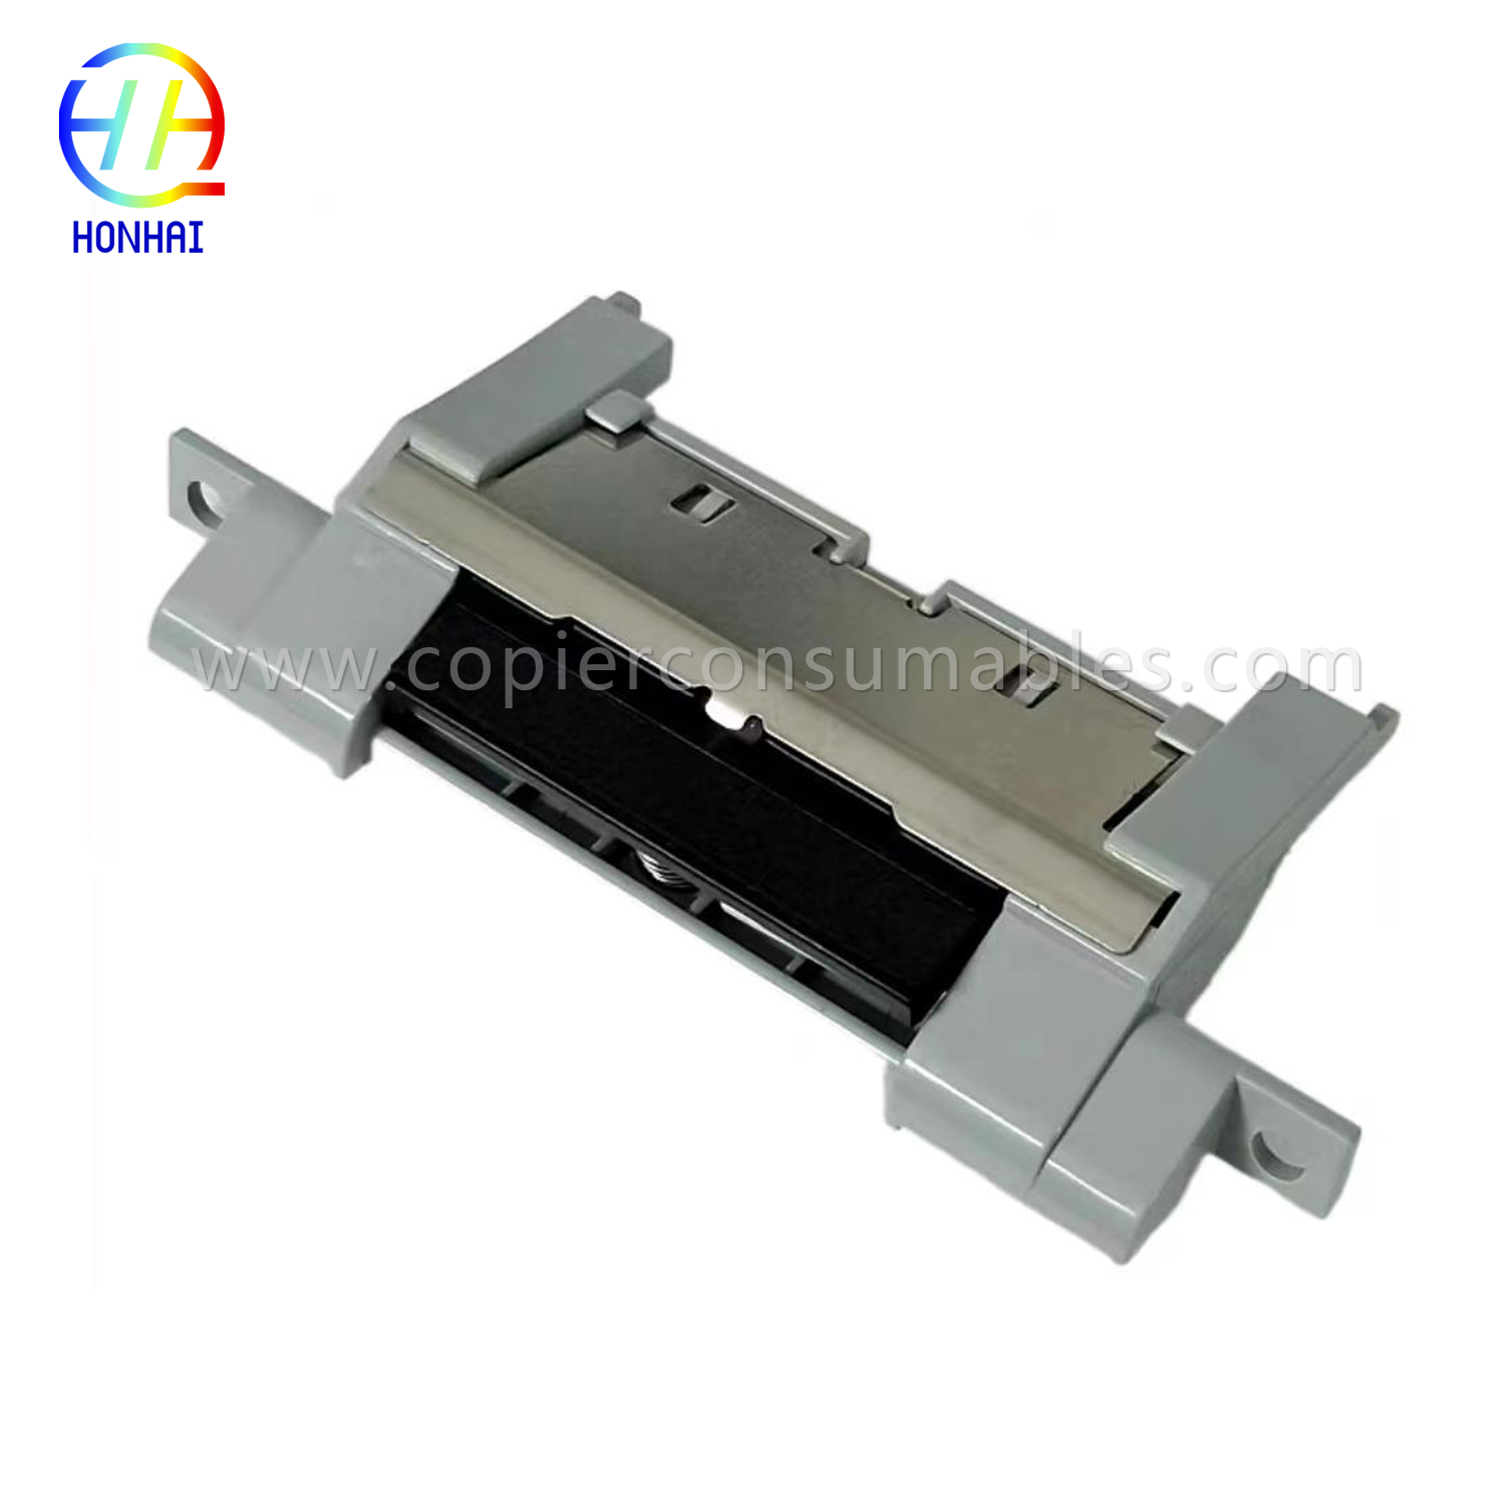 Separation Pad Tray 2 for HP Laserjet P2035 P2035n P2055D P2055dn P2055X RM1-6397-000